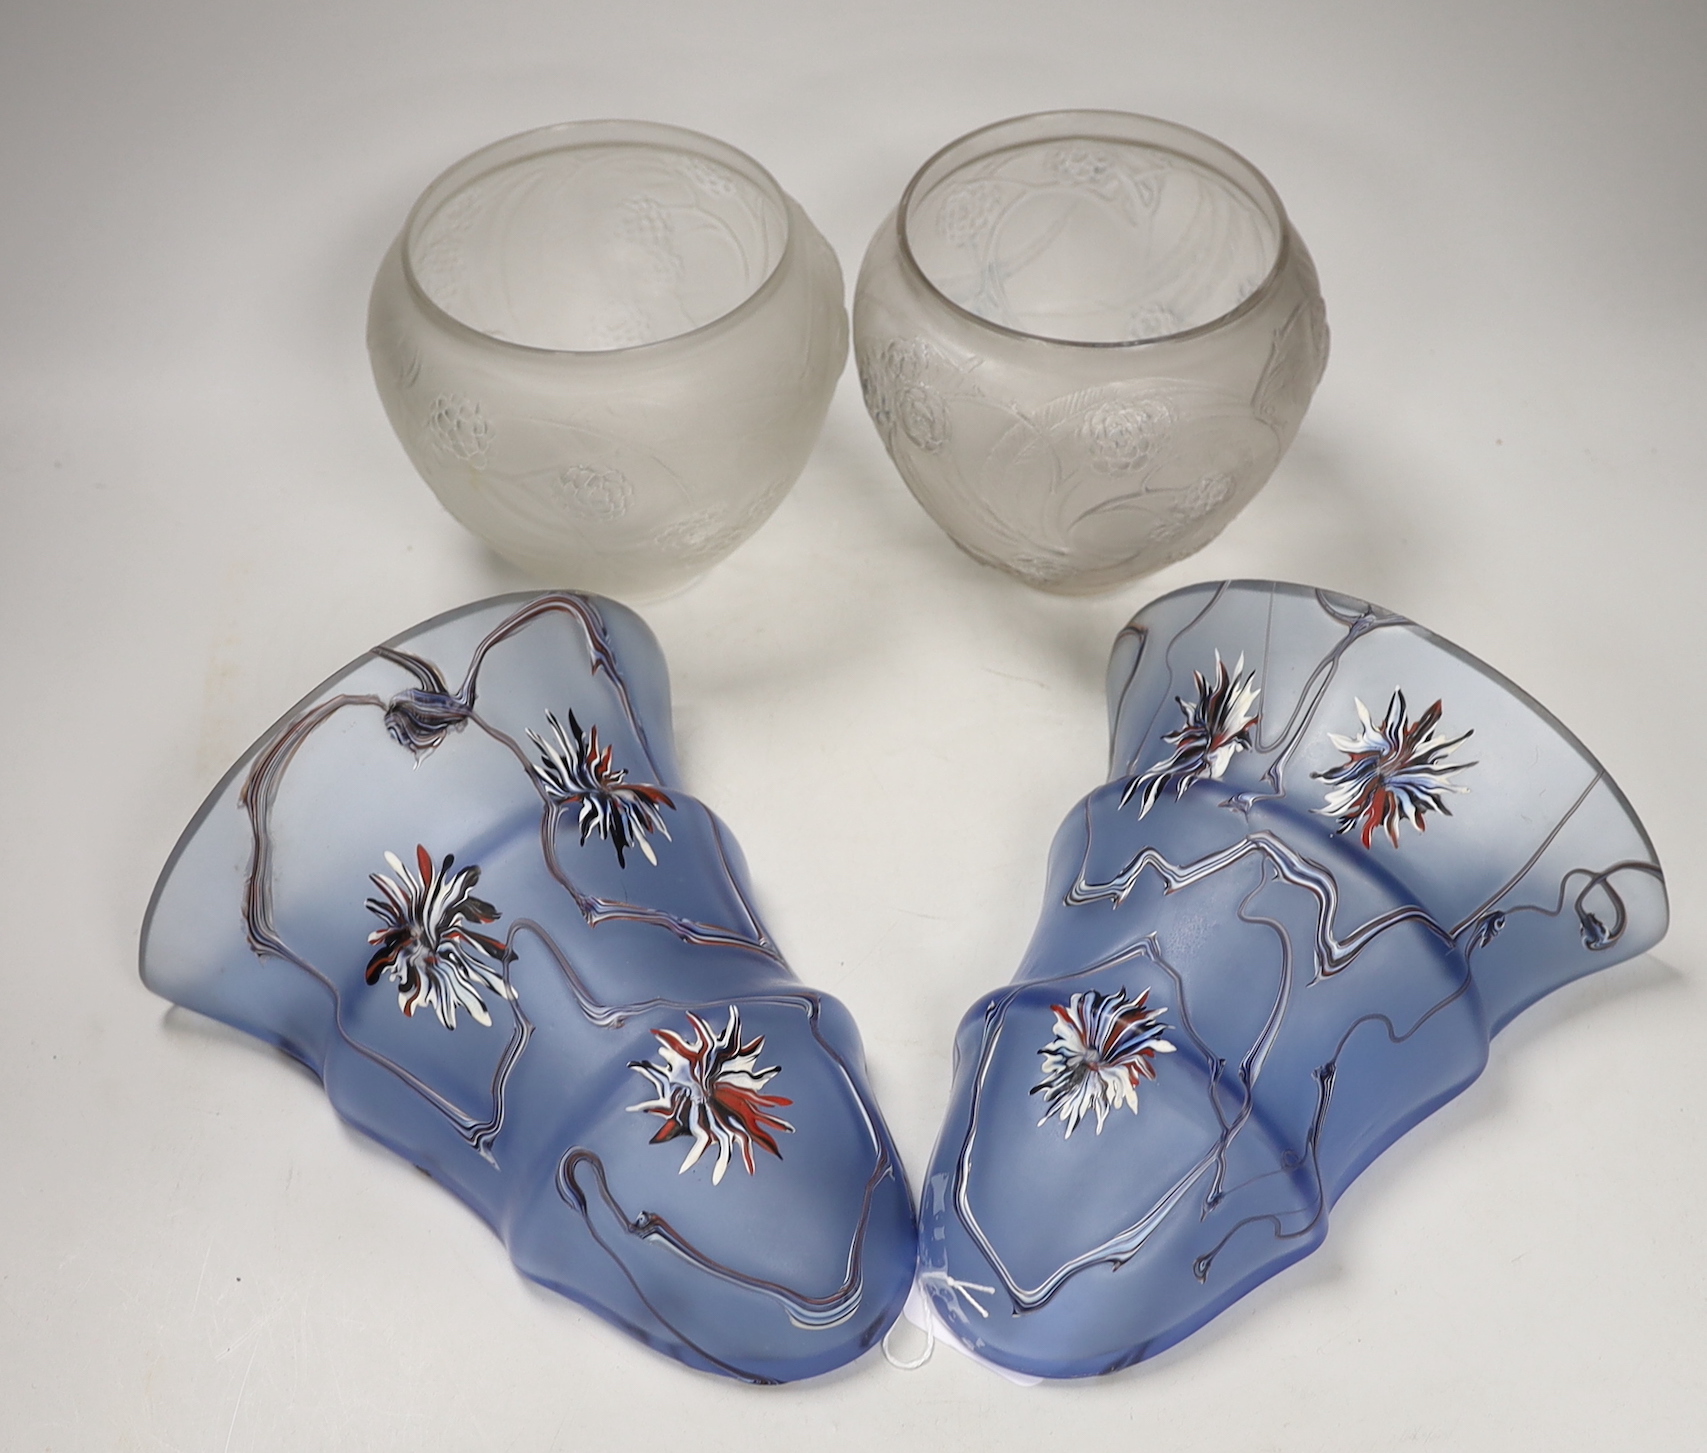 Two R. Lalique Nefliers vases, 14cm high, and a pair of blue enamelled glass wall pockets                                                                                                                                   